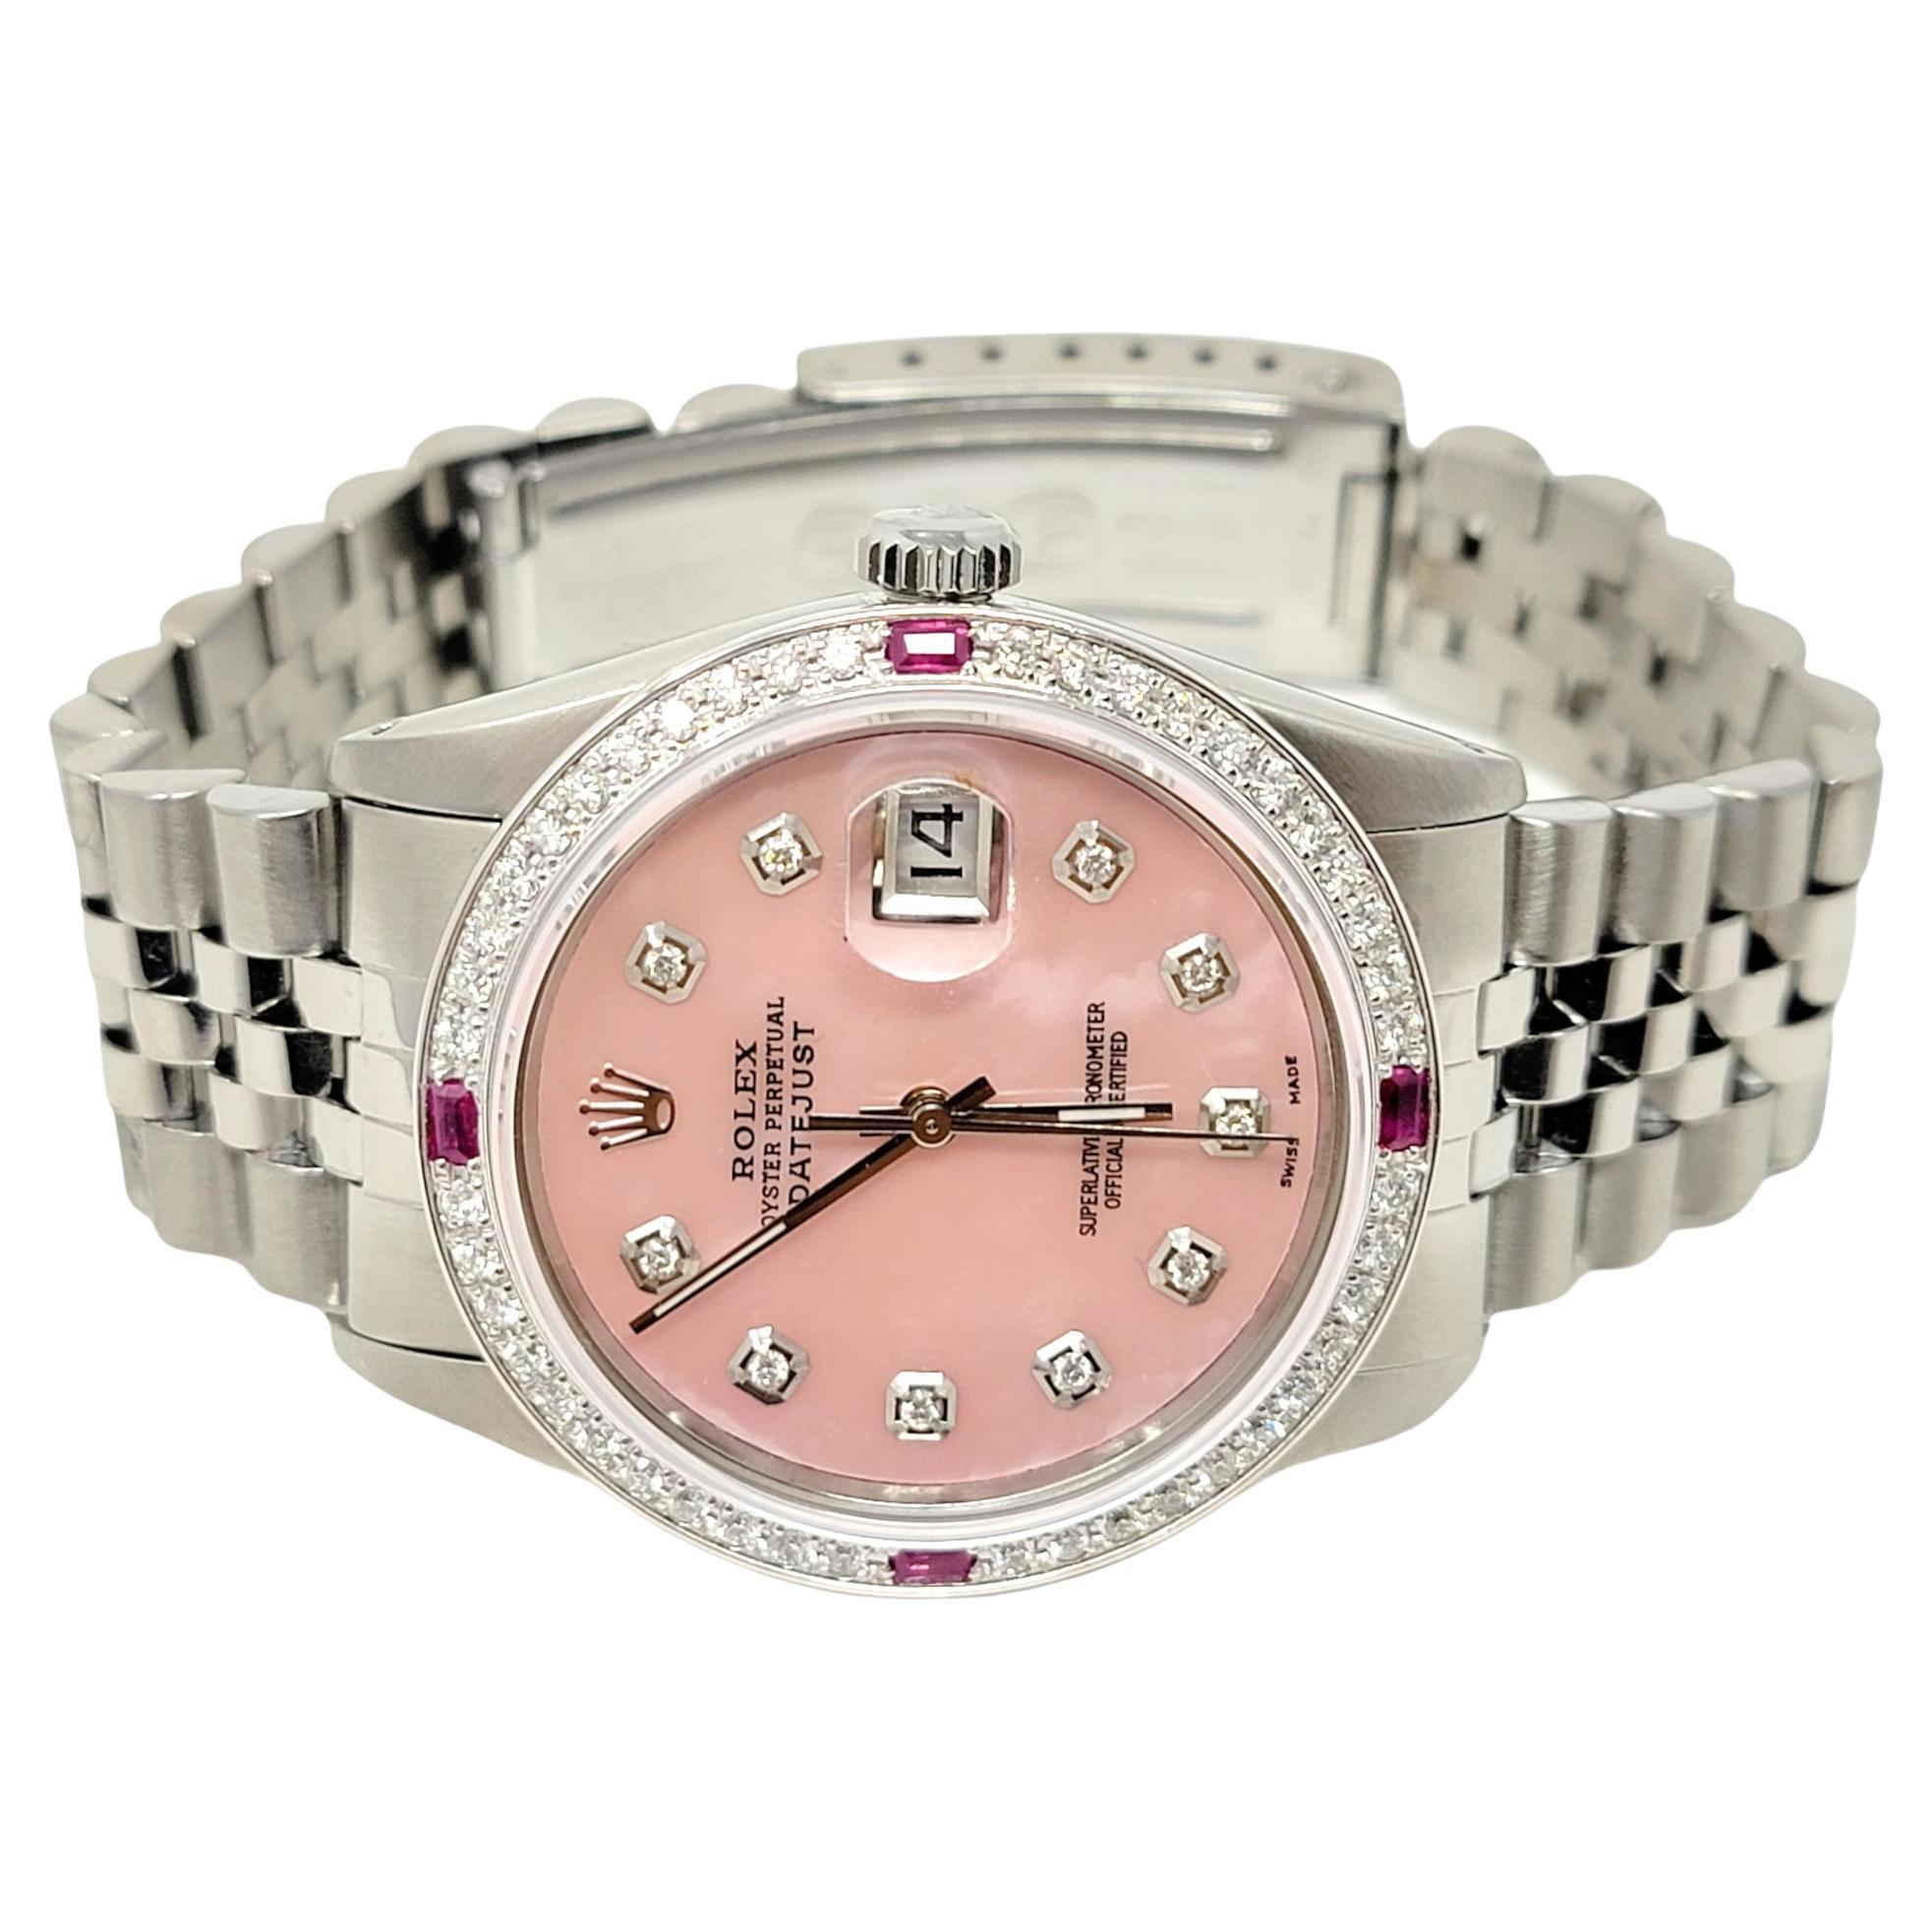 Incredible ladies custom pink Mother of Pearl Rolex datejust wristwatch. This stunning, high quality designer timepiece is embellished with shimmering natural diamonds and rubies and is made of 18 karat white gold and stainless steel. This